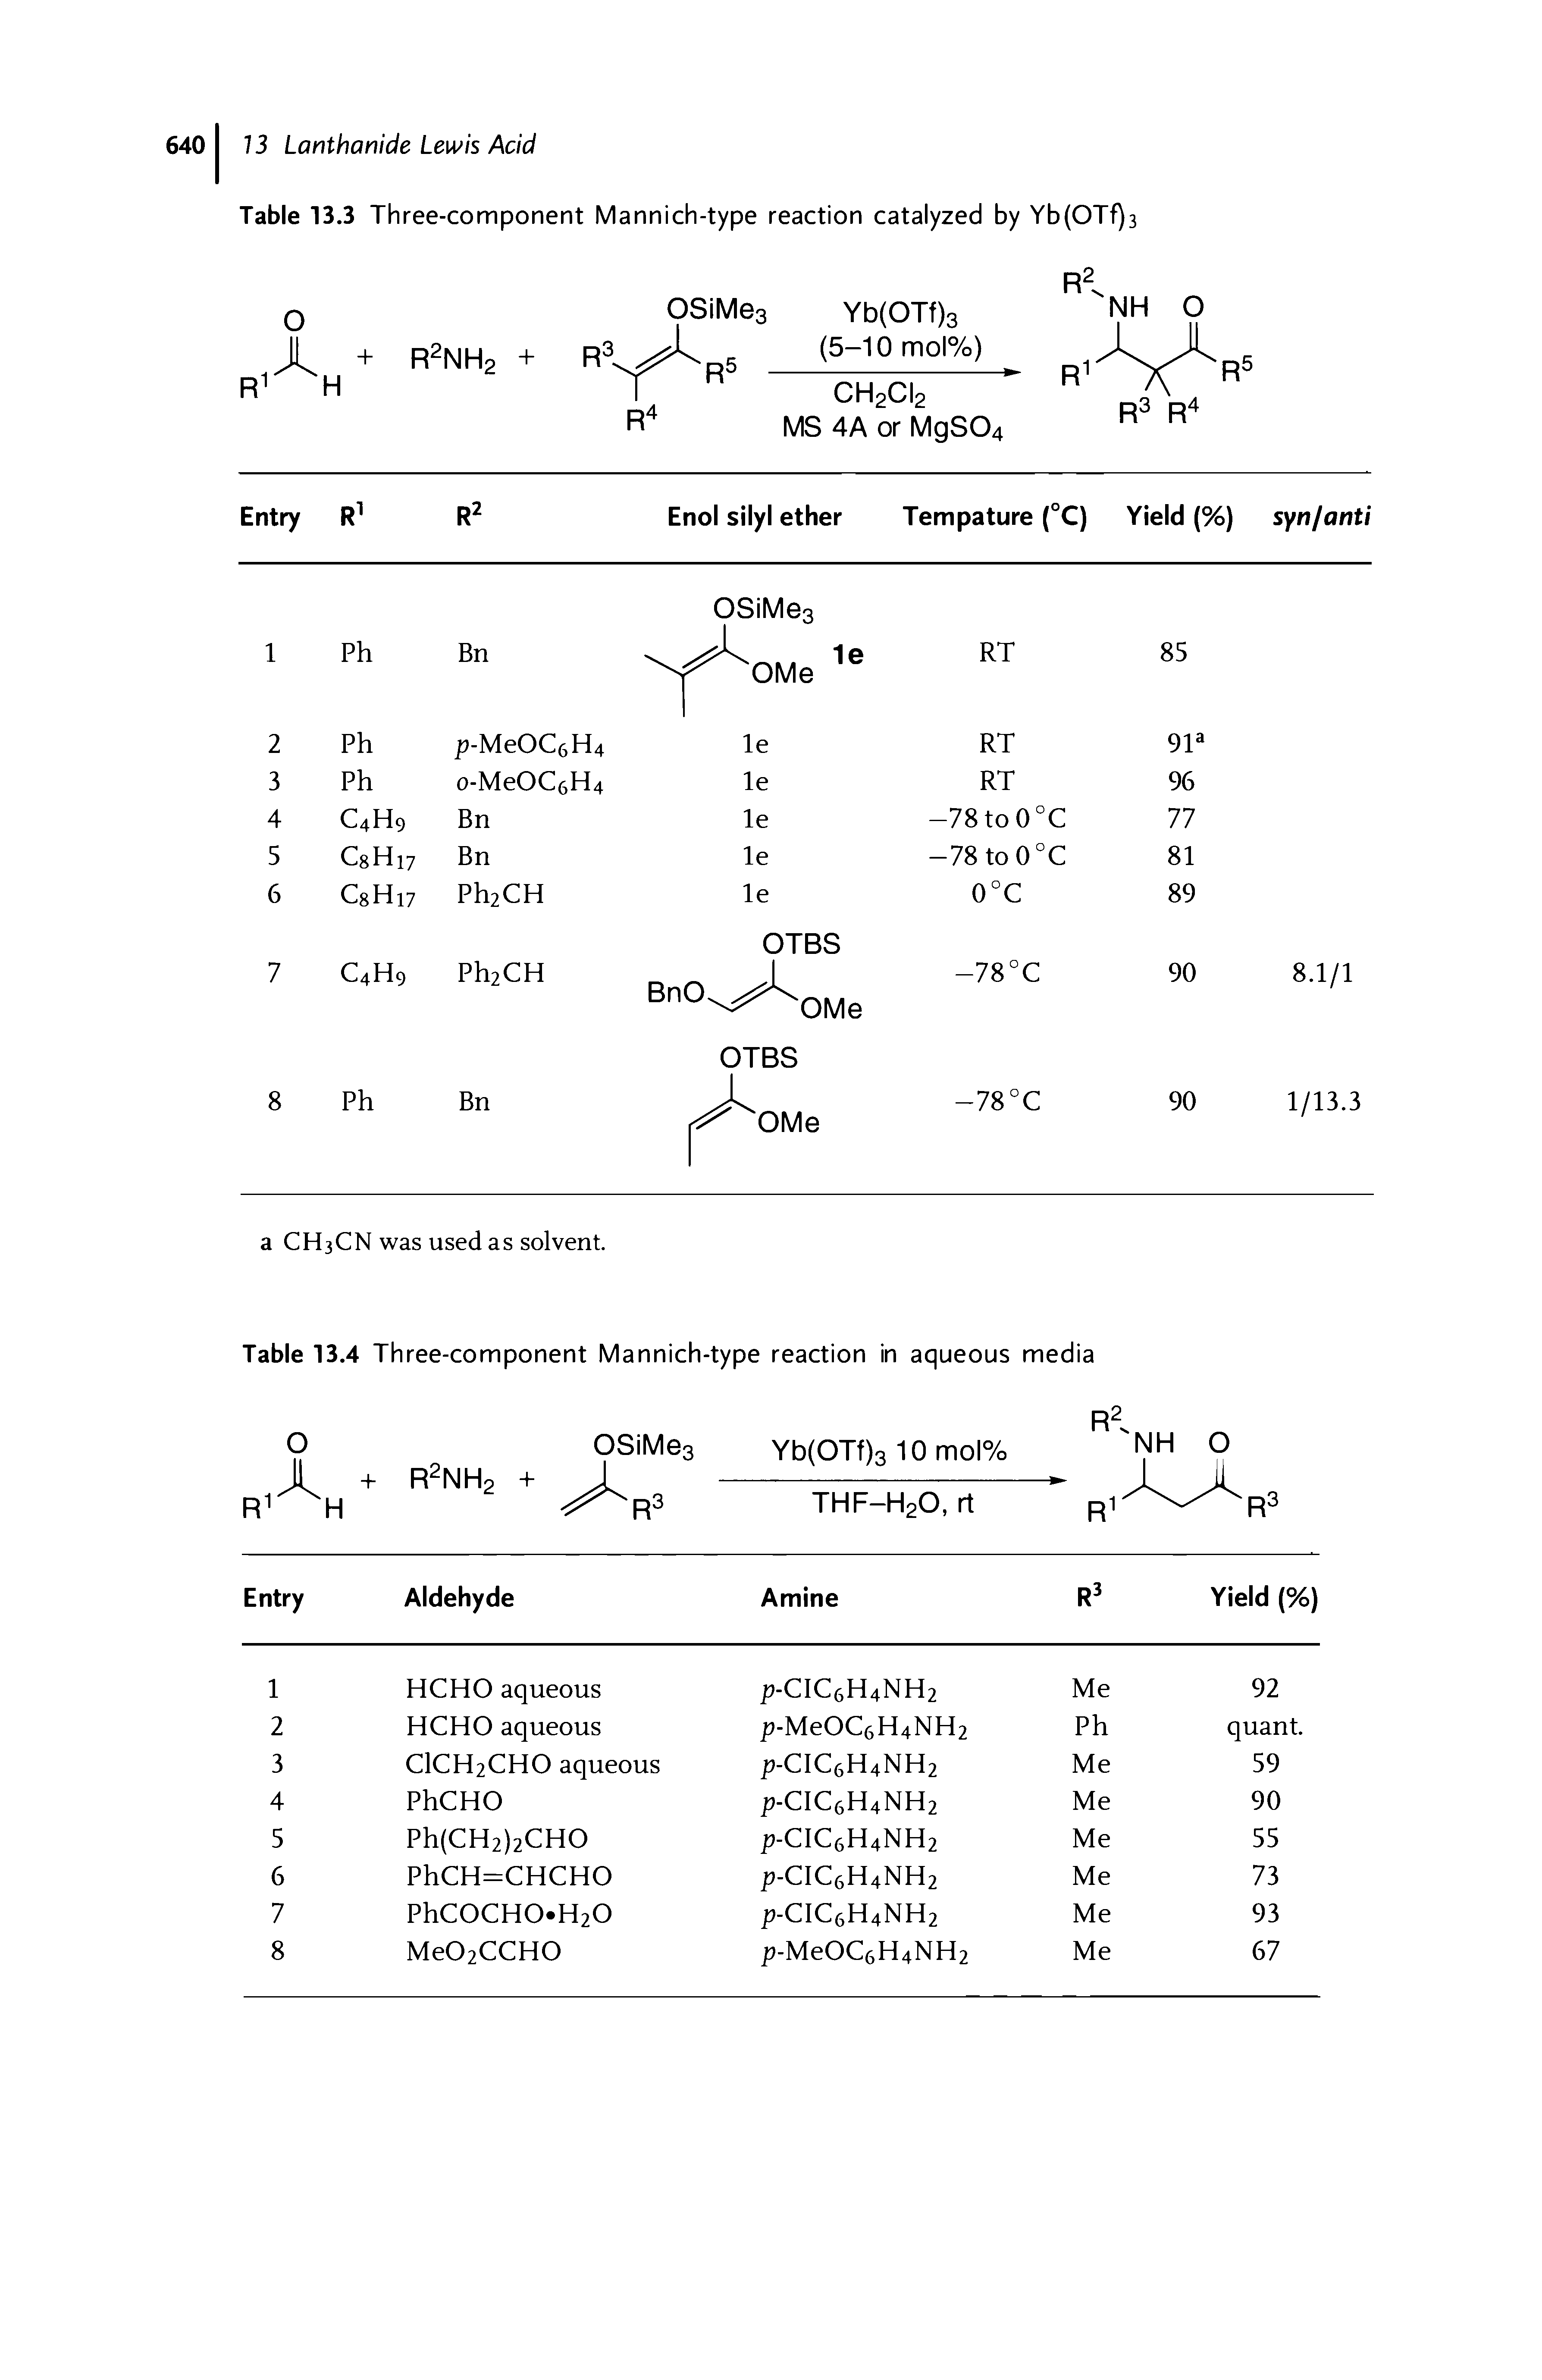 Table 13.3 Three-component Mannich-type reaction catalyzed by Yb(OTf)3...